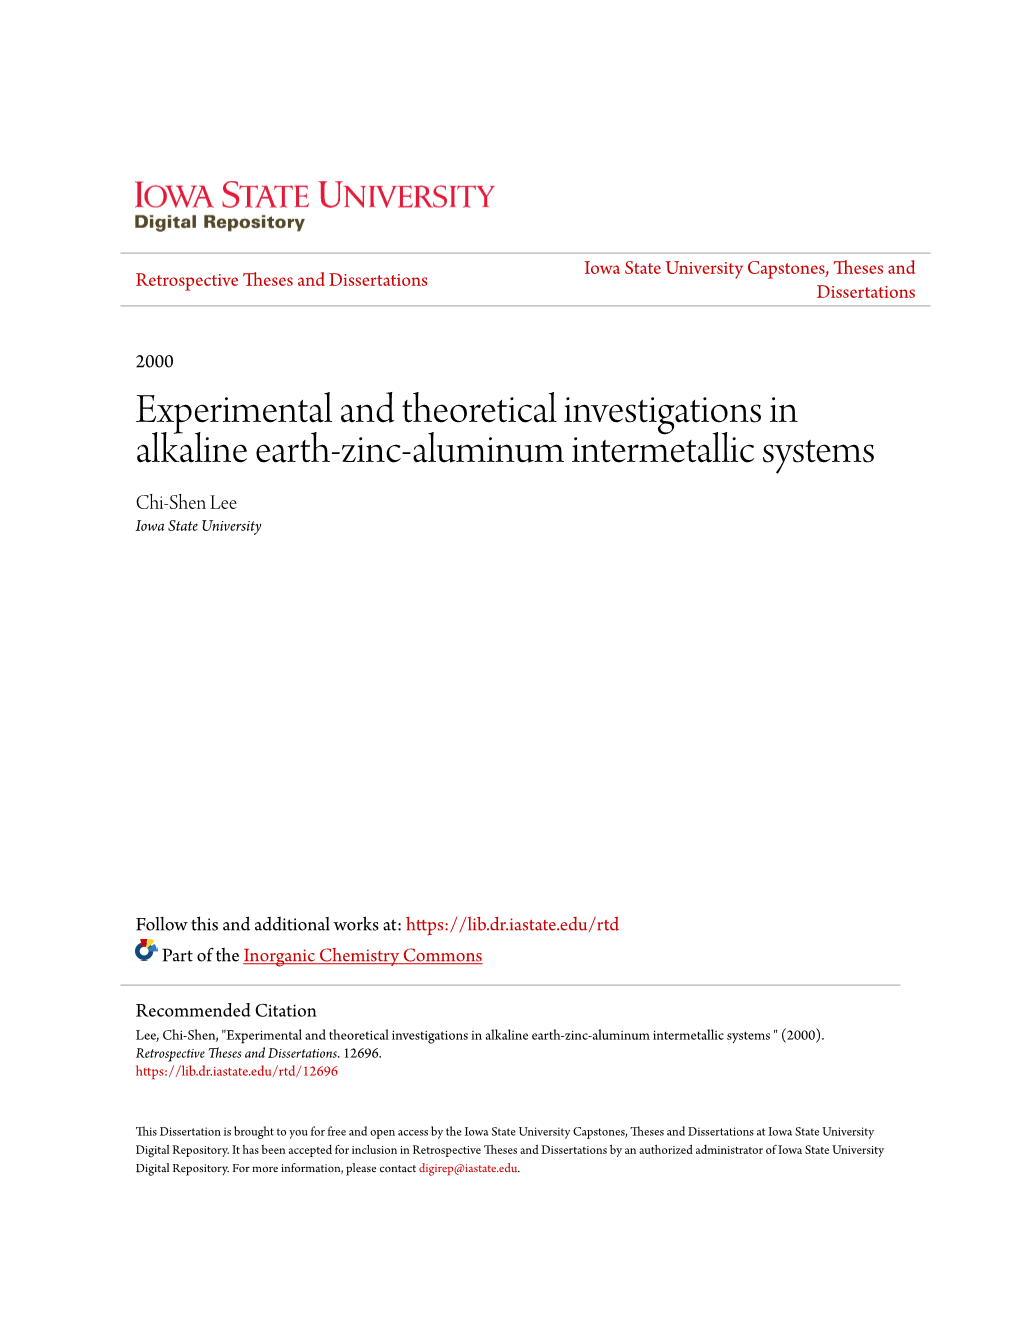 Experimental and Theoretical Investigations in Alkaline Earth-Zinc-Aluminum Intermetallic Systems Chi-Shen Lee Iowa State University